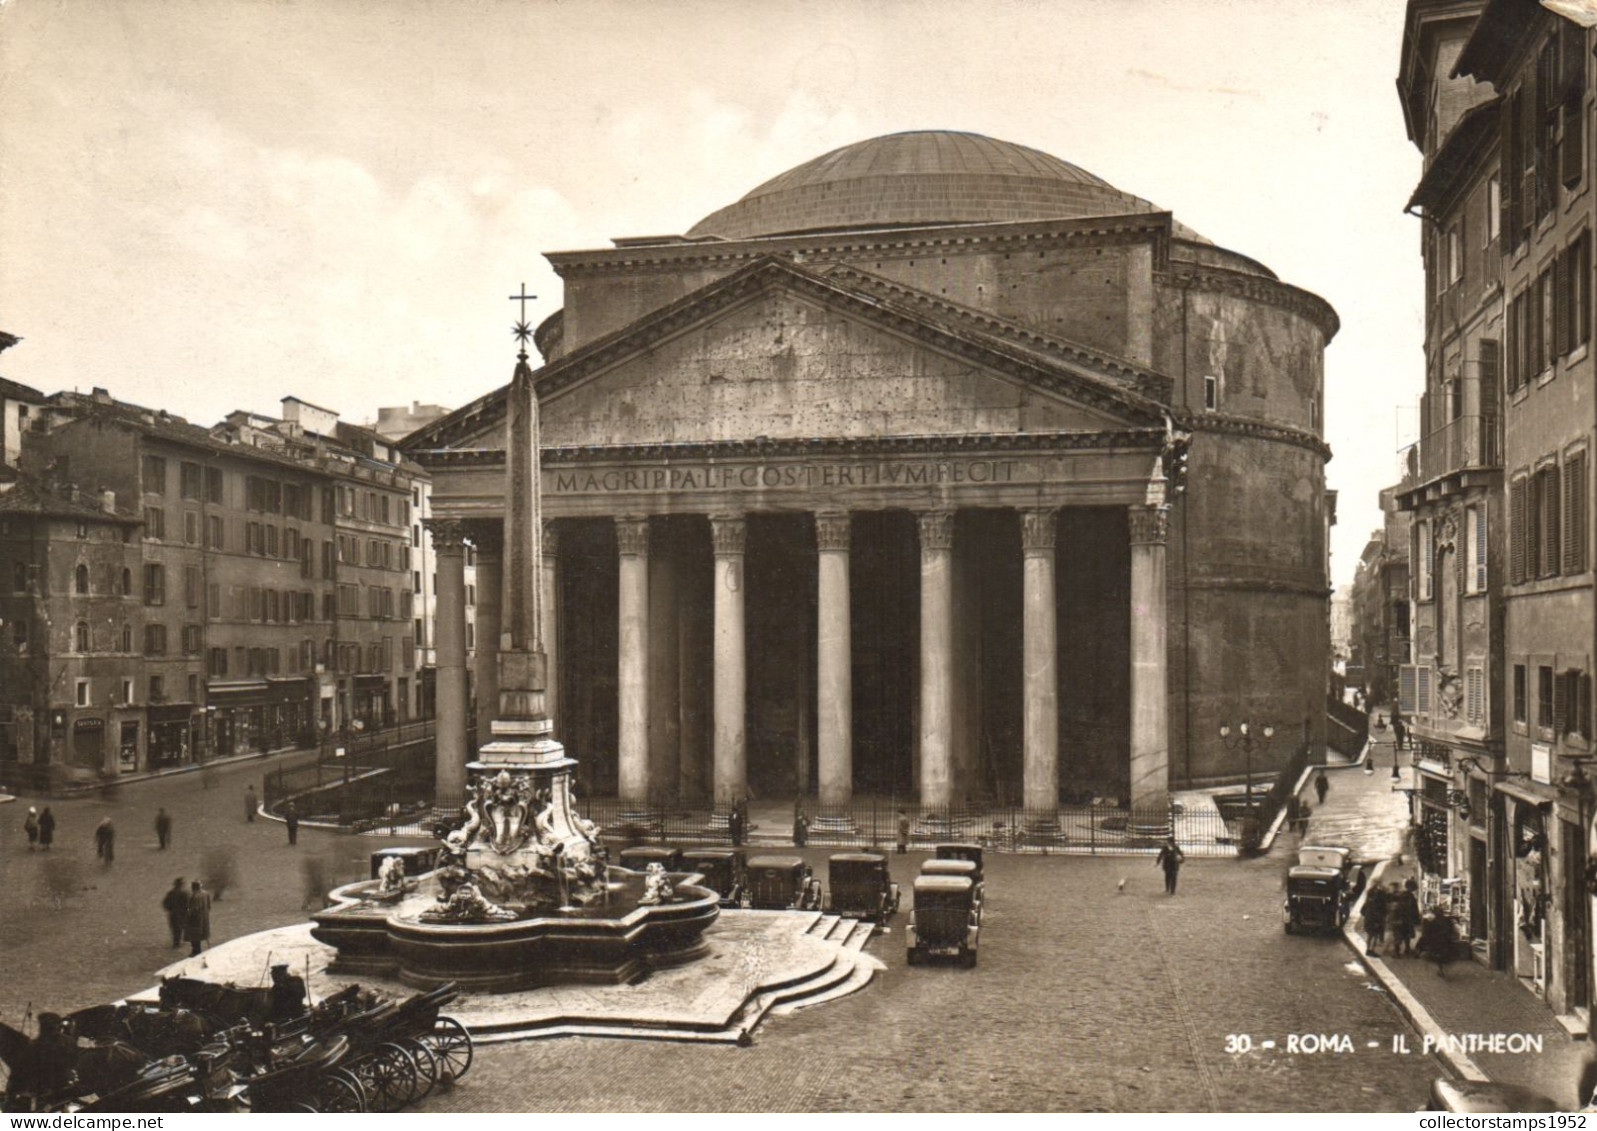 ROME, PANTHEON, ARCHITECTURE, MONUMENT, FOUNTAIN, CARS, CARRIAGE, ITALY, POSTCARD - Panthéon